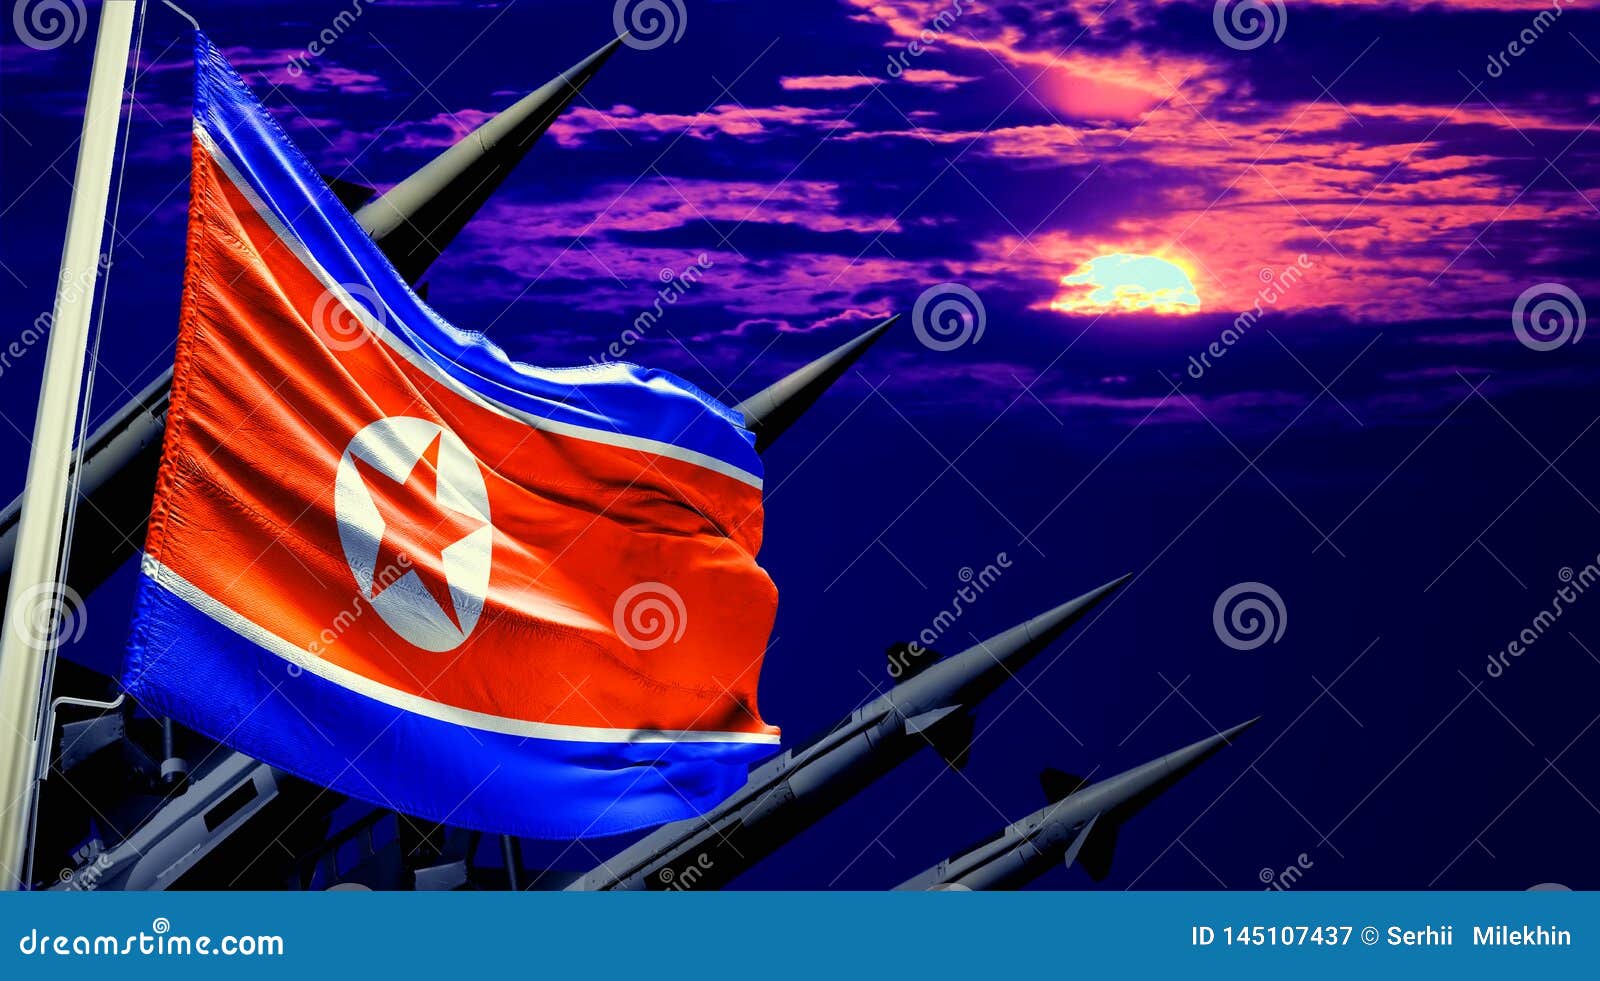 north korea flag and nuclear missiles on sunset sky background